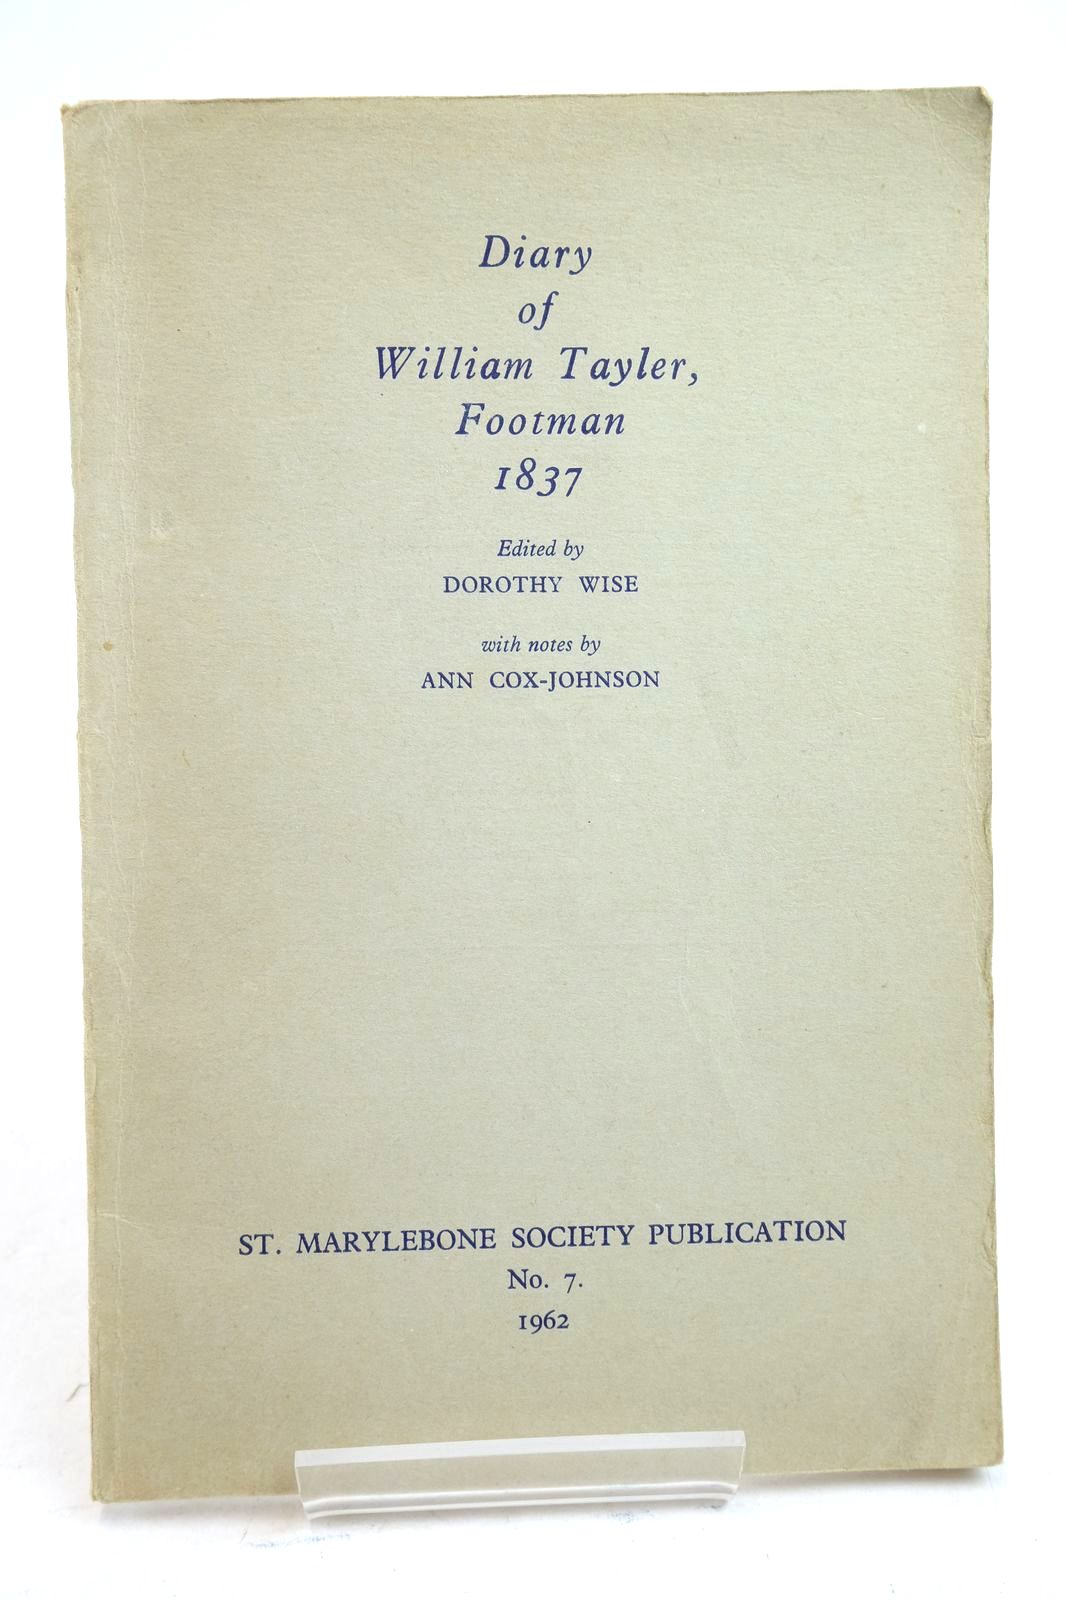 Photo of DIARY OF WILLIAM TAYLER, FOOTMAN 1837 written by Tayler, William Wise, Dorothy Cox-Johnson, Ann published by St. Marylebone Society (STOCK CODE: 2134798)  for sale by Stella & Rose's Books